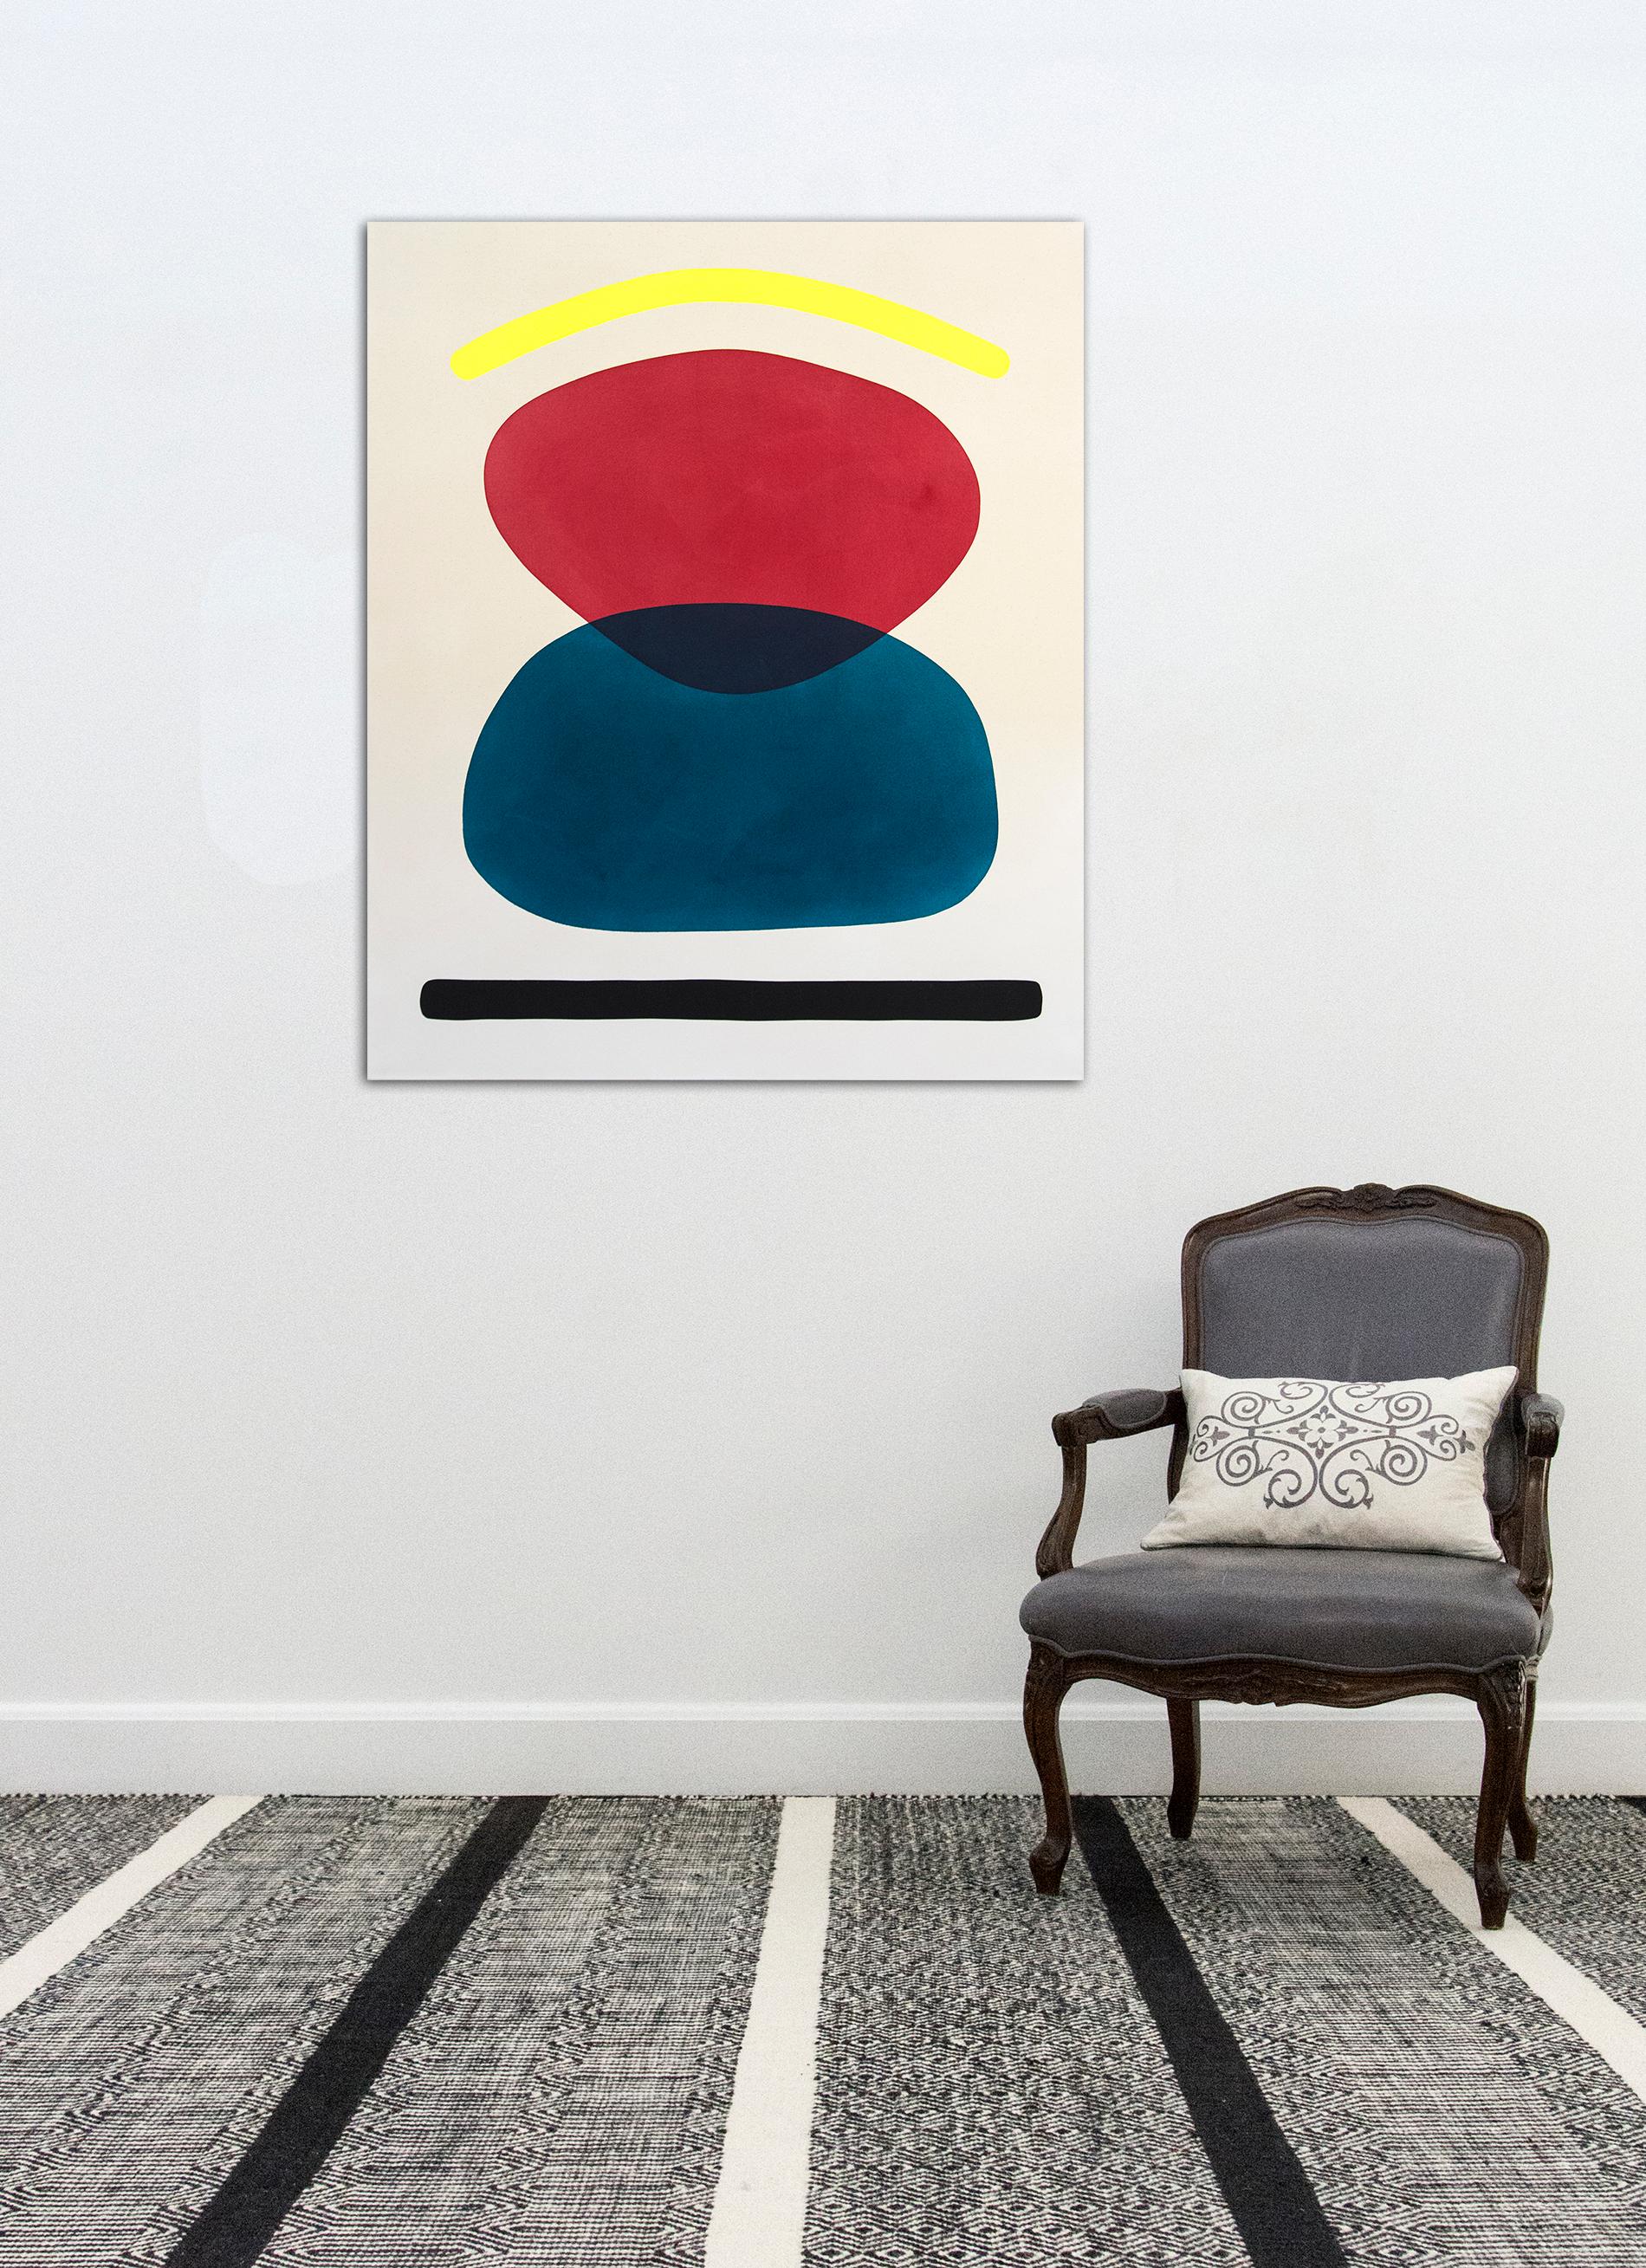 Two overlapping rounds of cerulean and poppy red are framed by thick lines of black and sun yellow in this bold painting by Aron Hill.

Hill obtained a BFA in Interdisciplinary Studies from the Alberta College of Art and Design and his MFA from